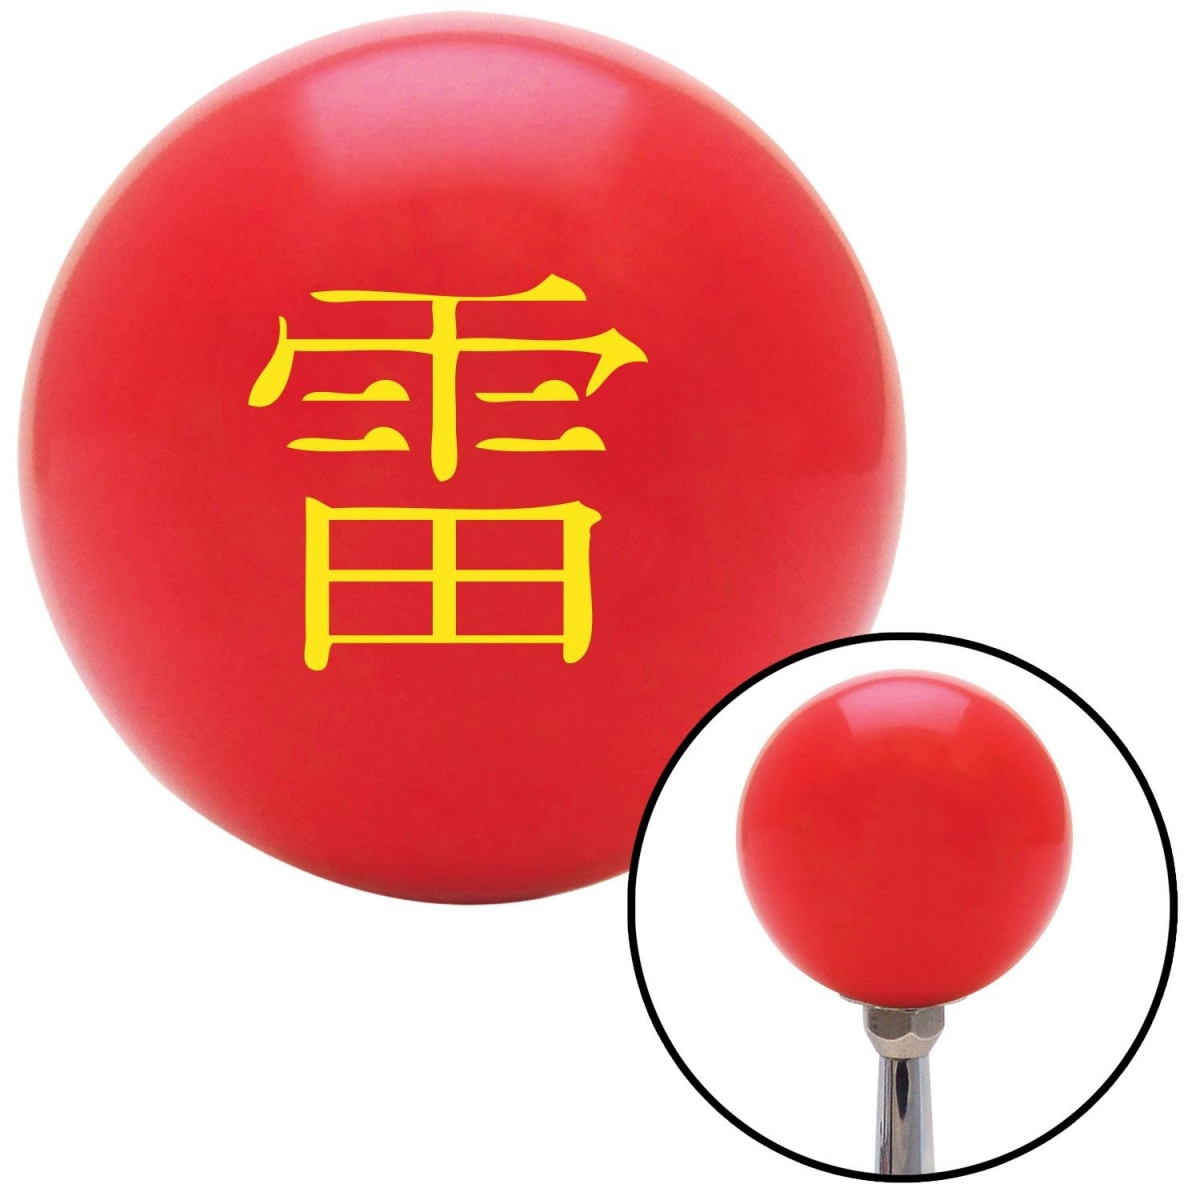 Picture of American Shifter 101641 Yellow Cloud Symbol Red Shift Knob with M16 x 1.5 Insert Shifter Auto Manual Custom